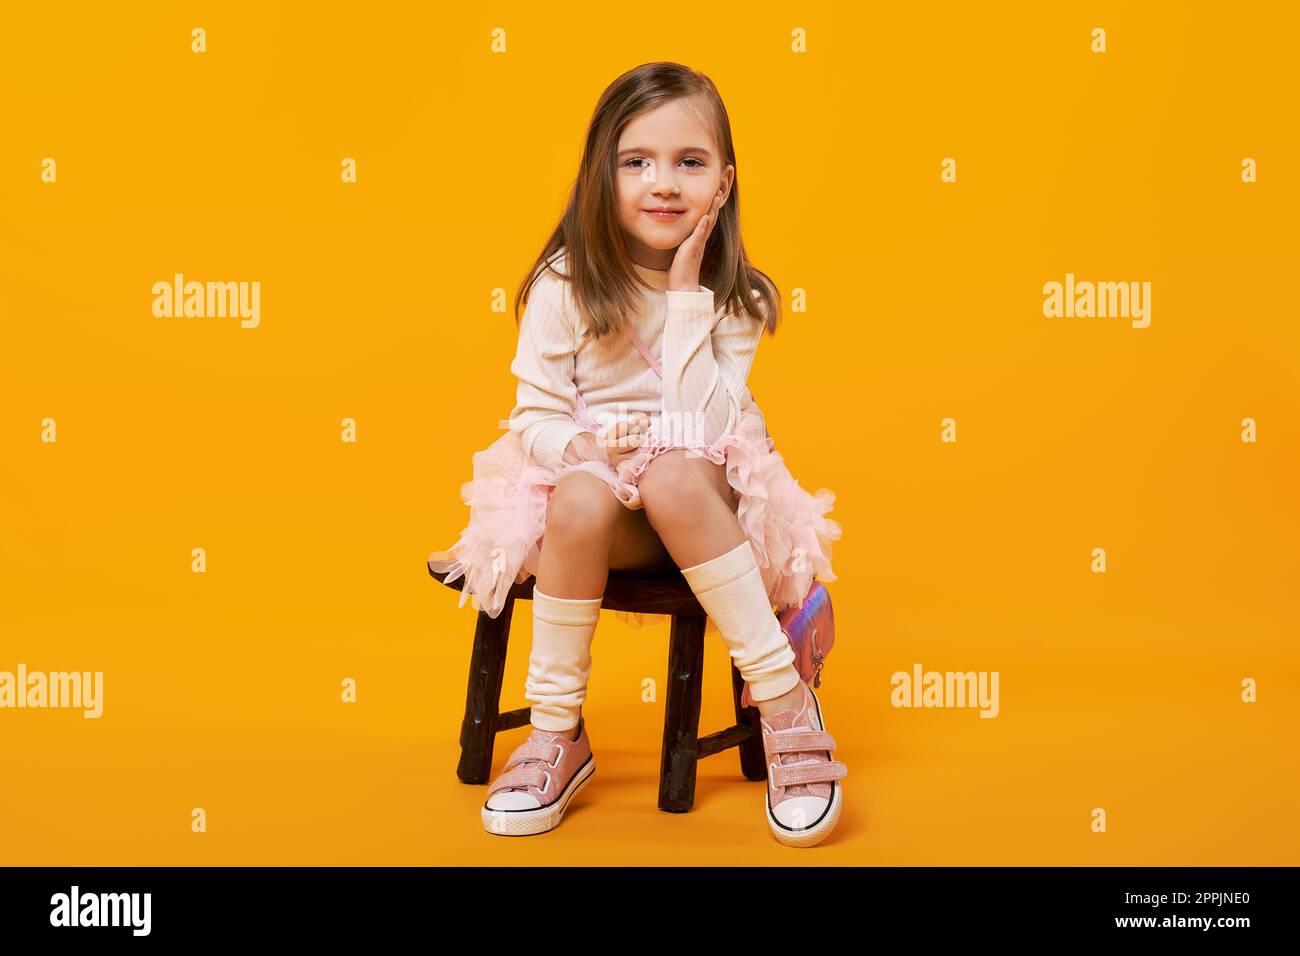 Young girl in tulle skirt and white pullover sitting on small wooden stool on bright yellow background Stock Photo